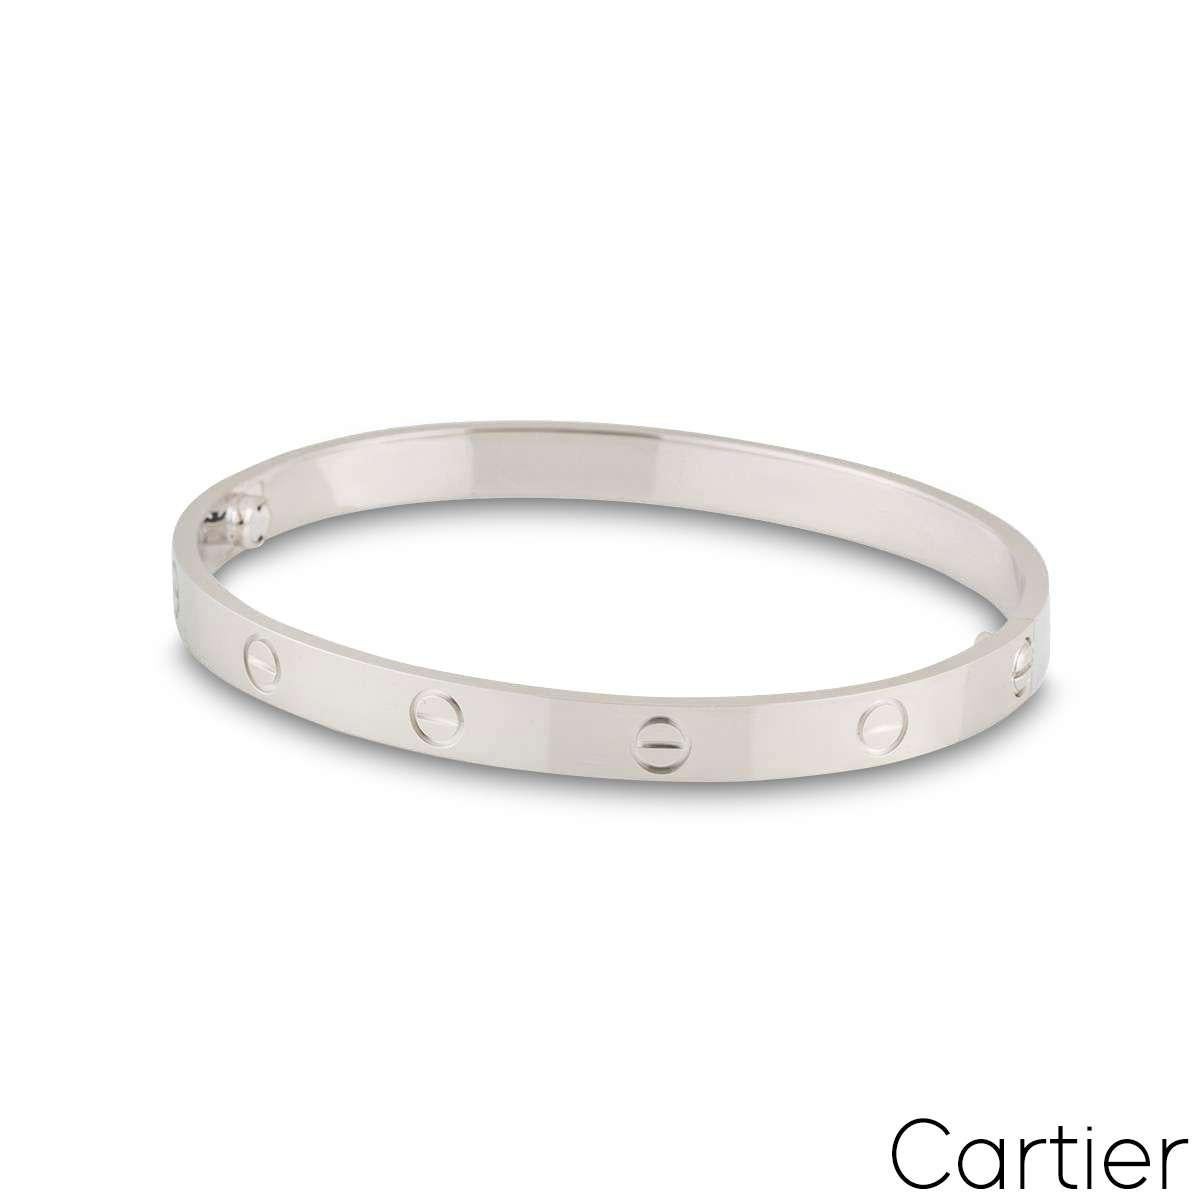 Cartier White Gold Plain Love Bracelet Size 18 B6035418 In Excellent Condition For Sale In London, GB